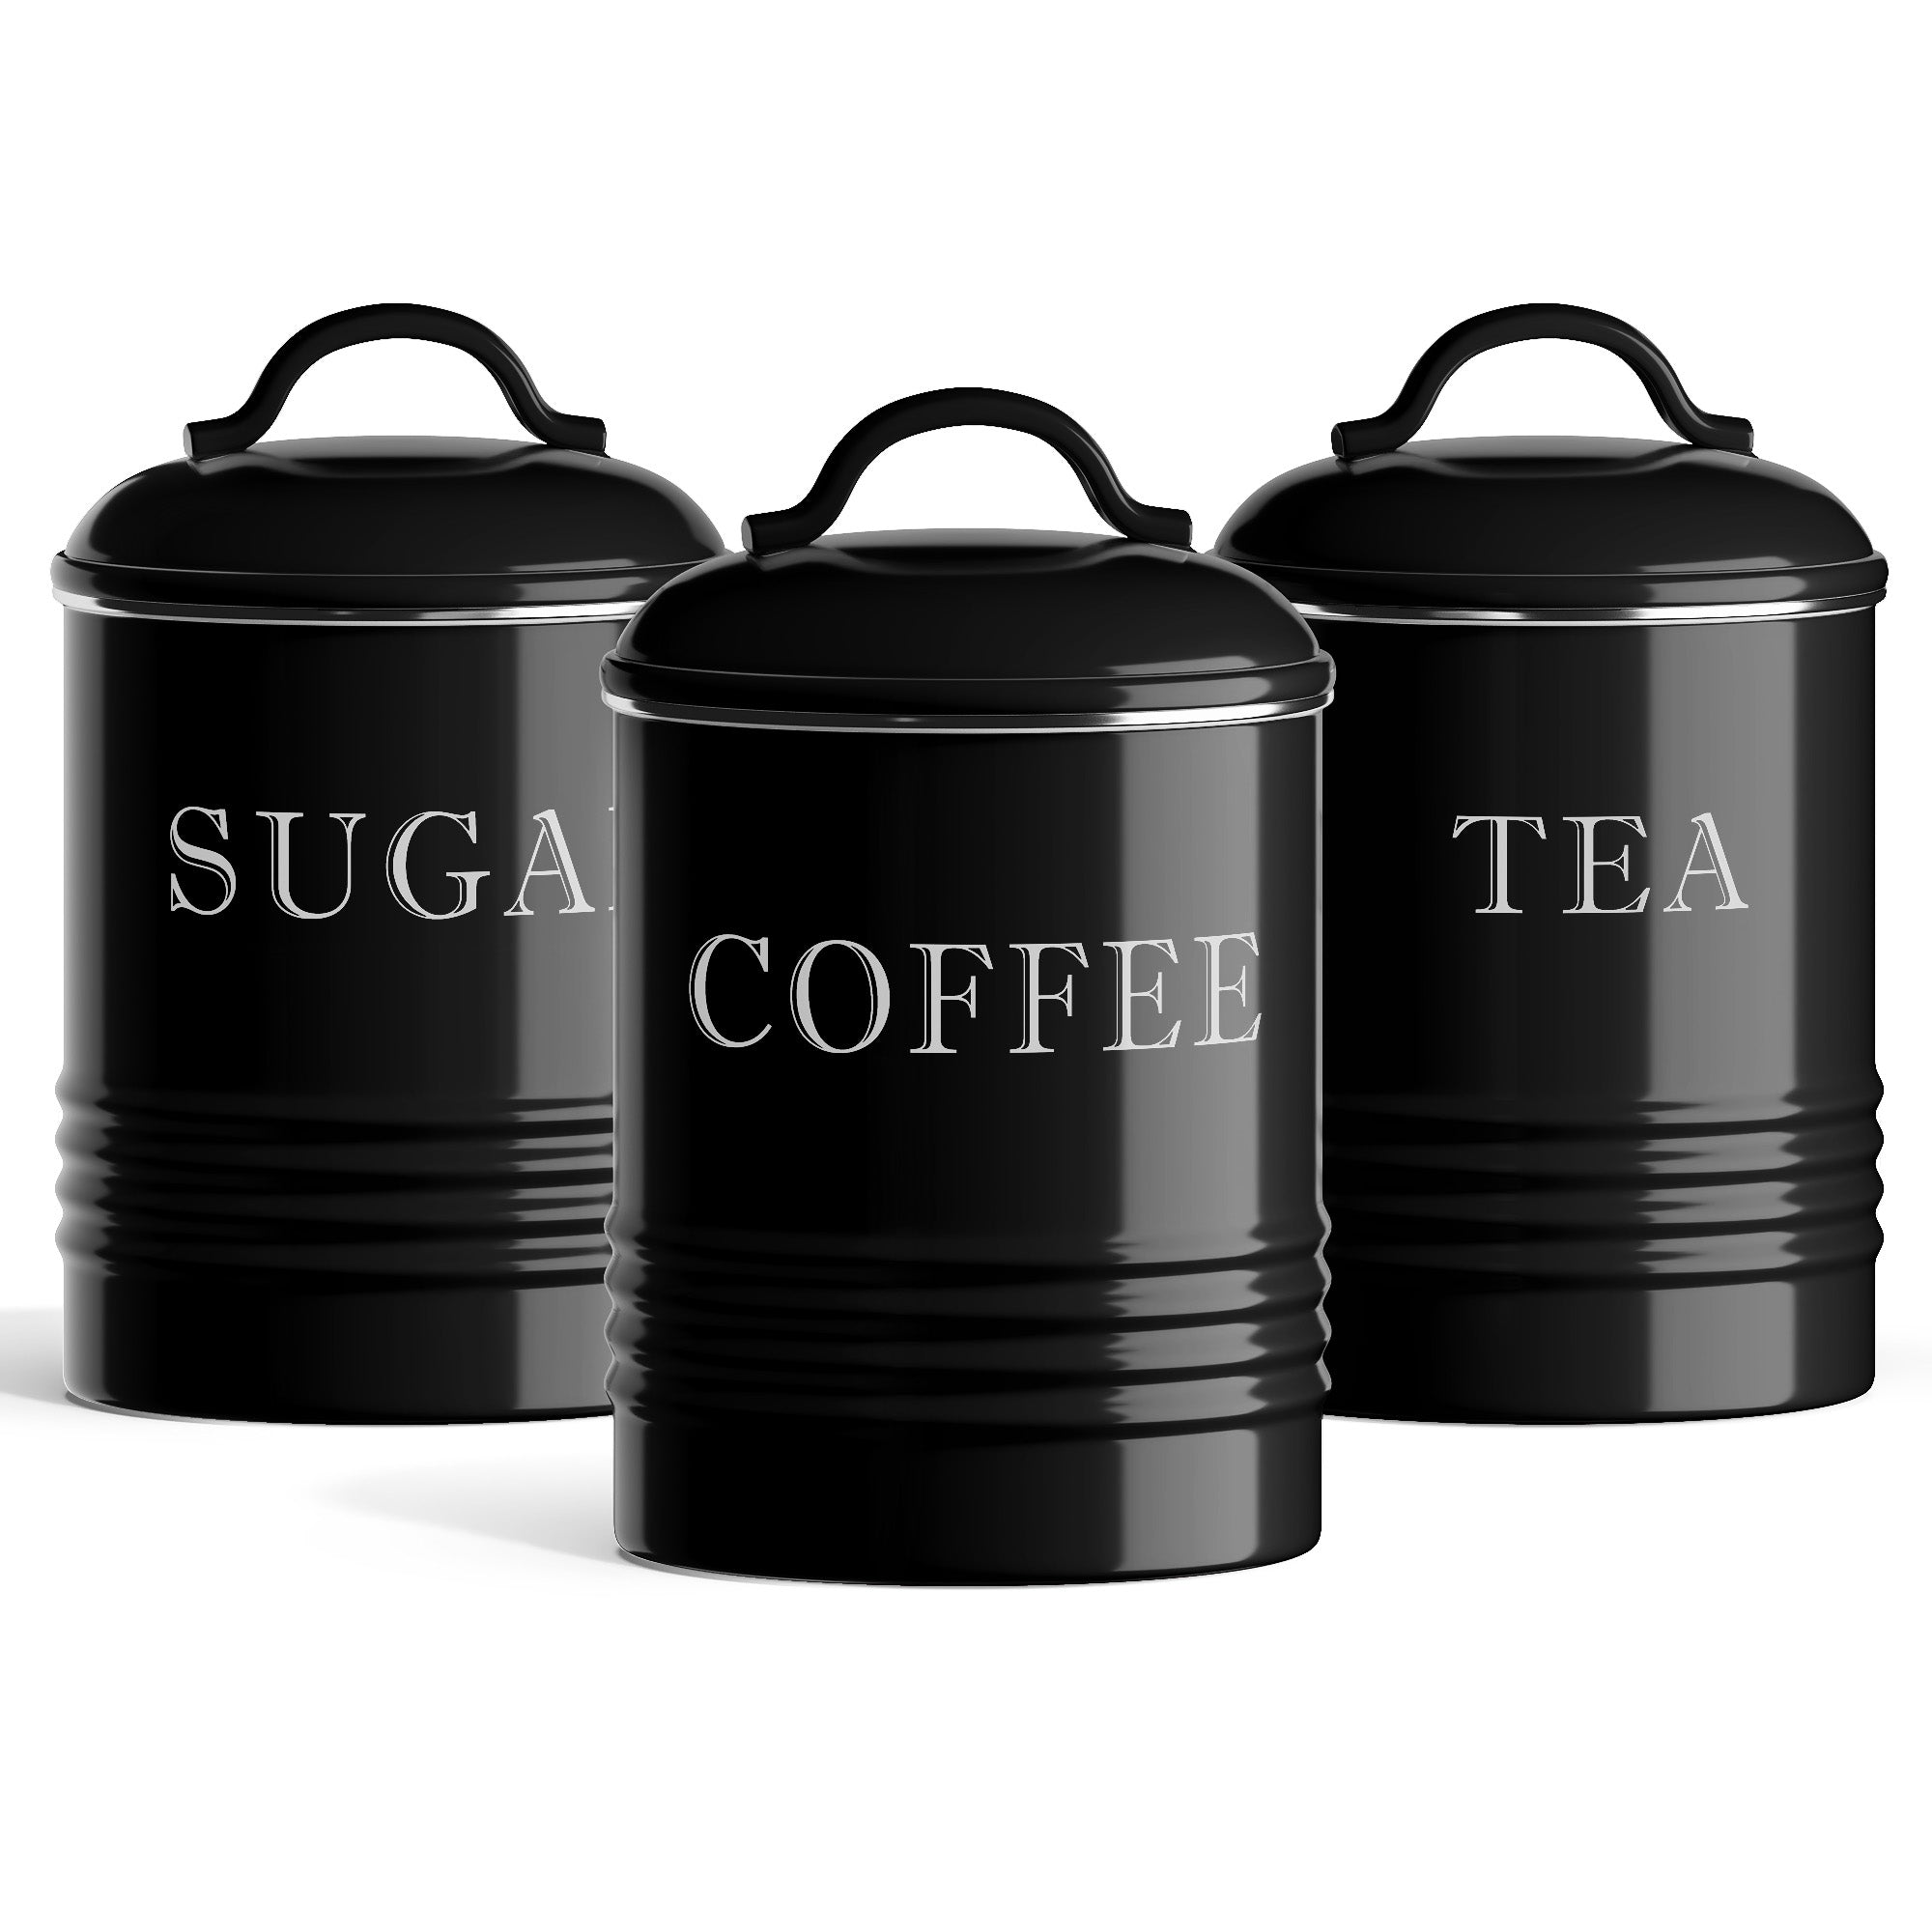 Vintage Inspired 3-Piece Metal Food Storage Canister Set - White and Black